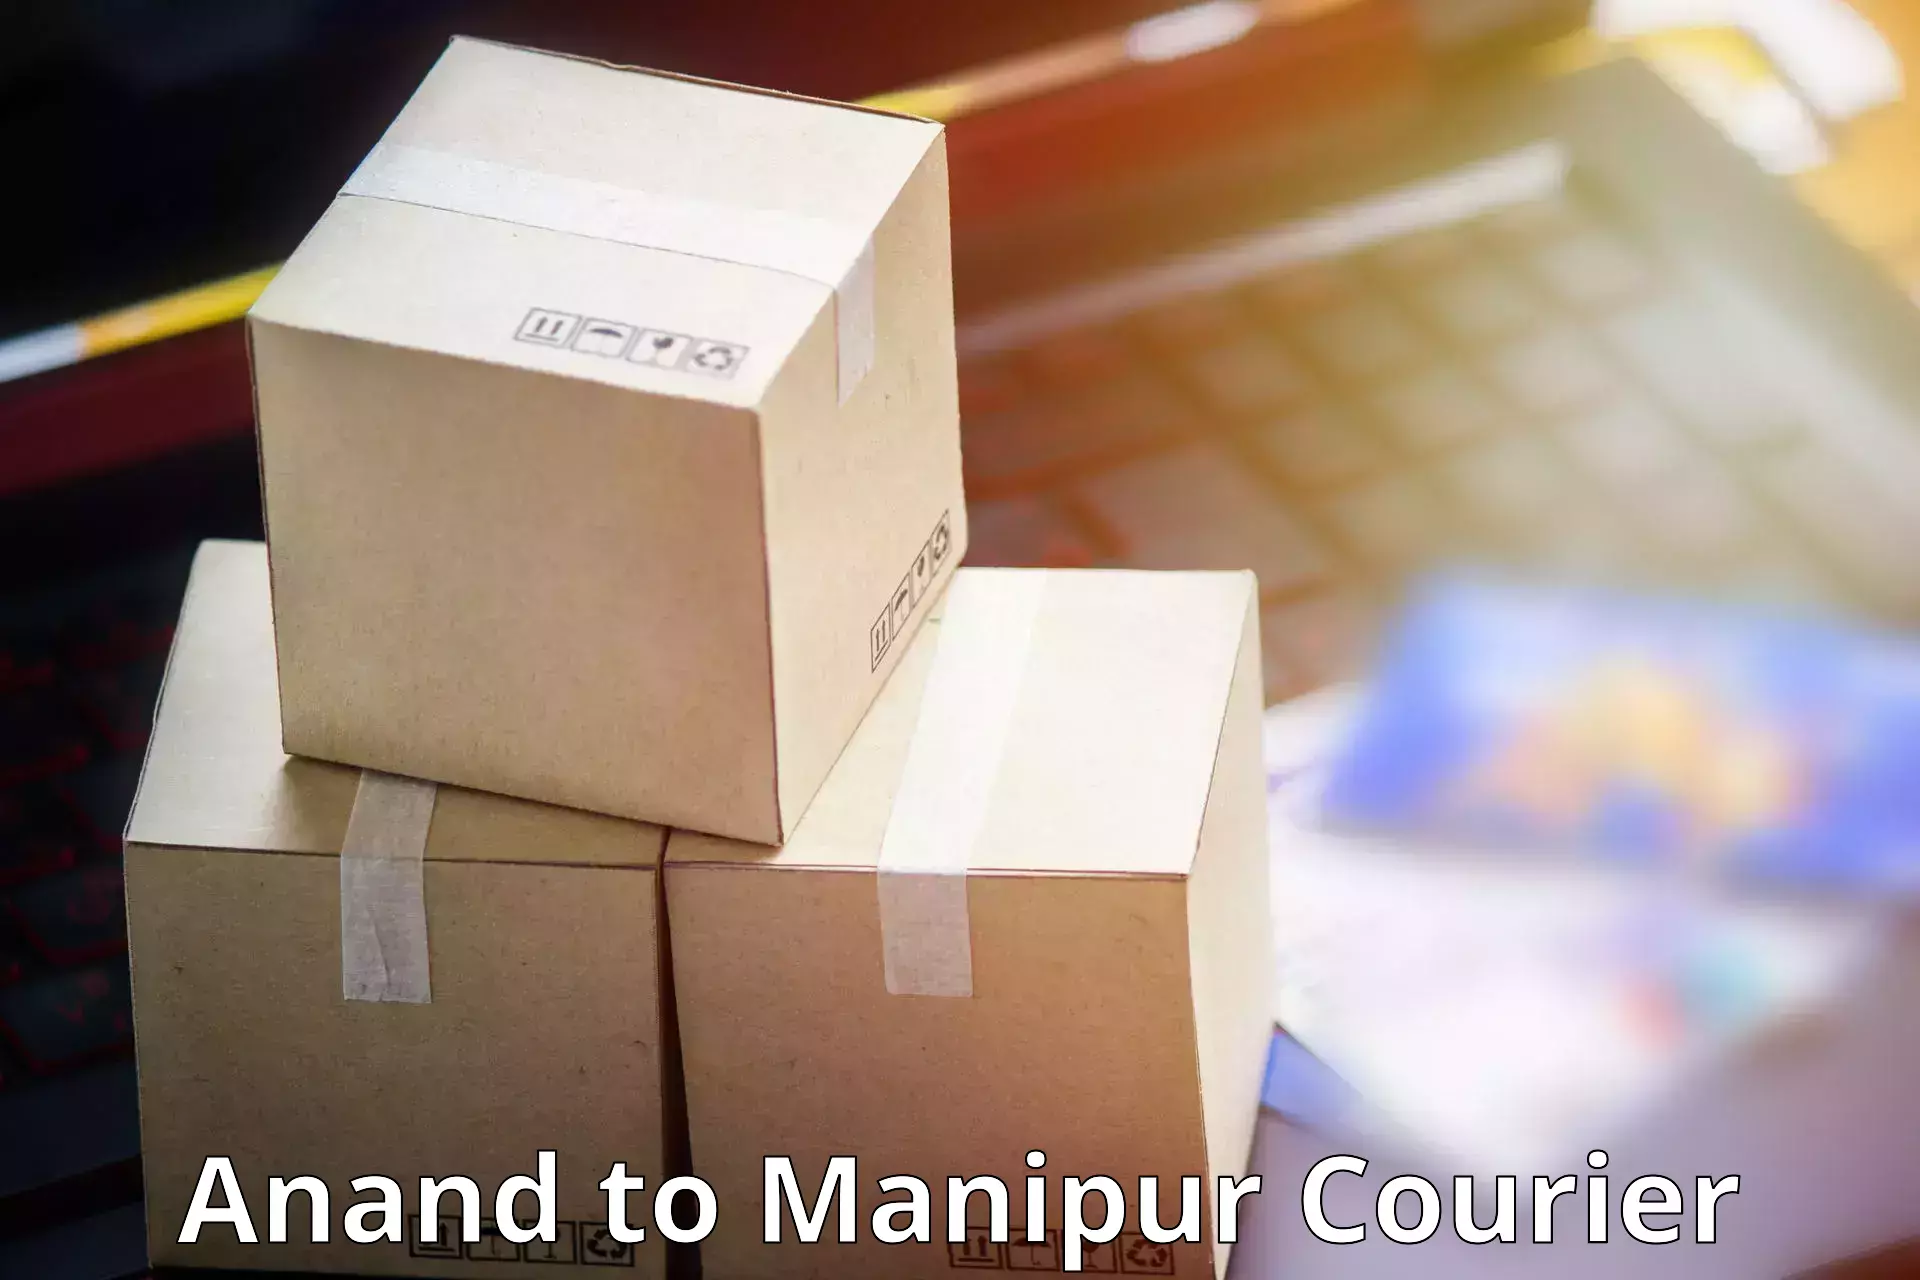 Specialized shipment handling Anand to Manipur